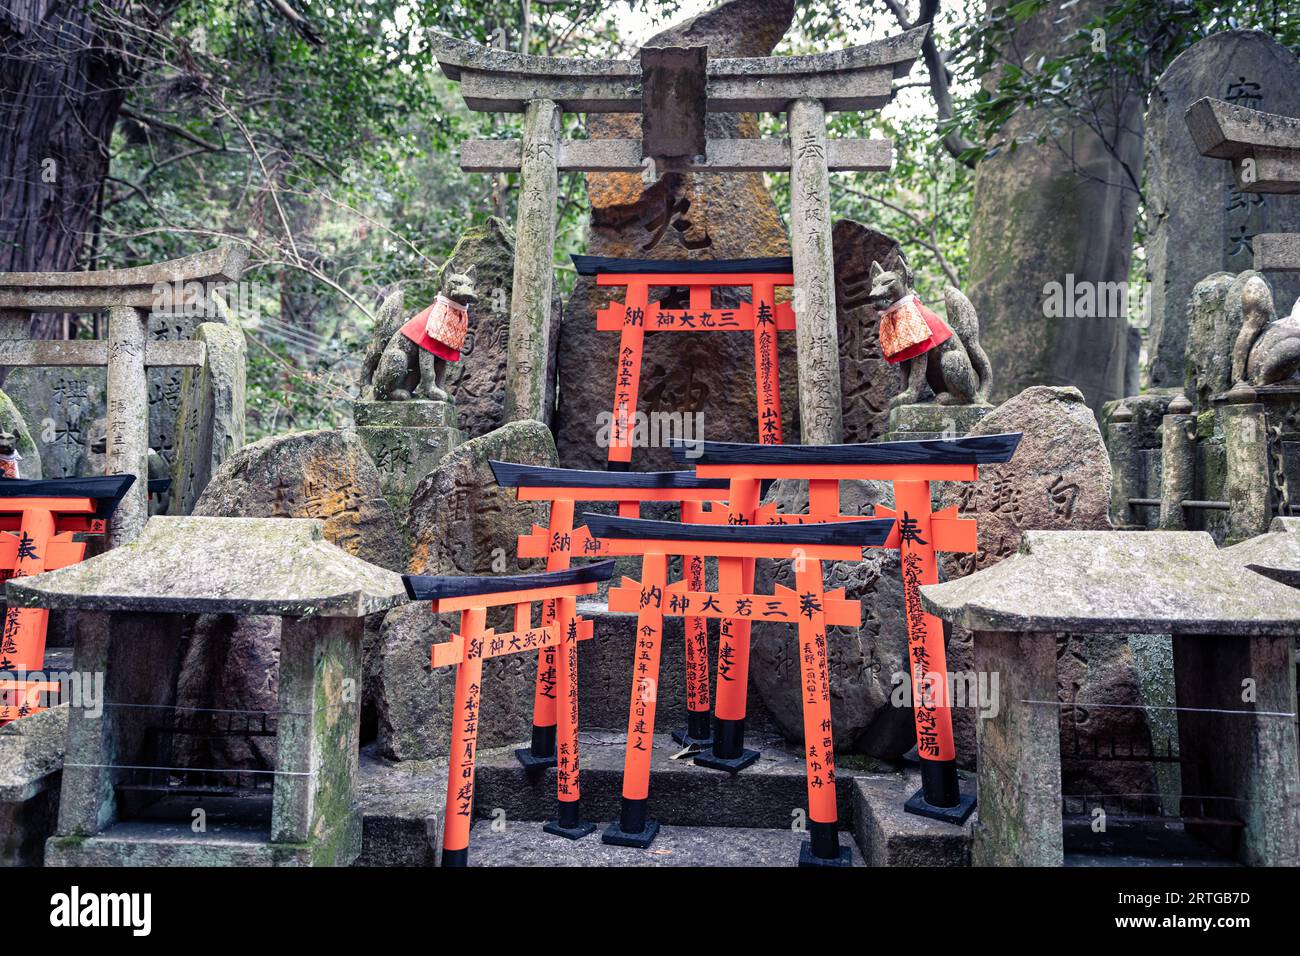 There are thousands upon thousands of orange colored torii gates and small alters along the pathway of Fushimi Inari Taisha in Kyoto, Japan. Stock Photo